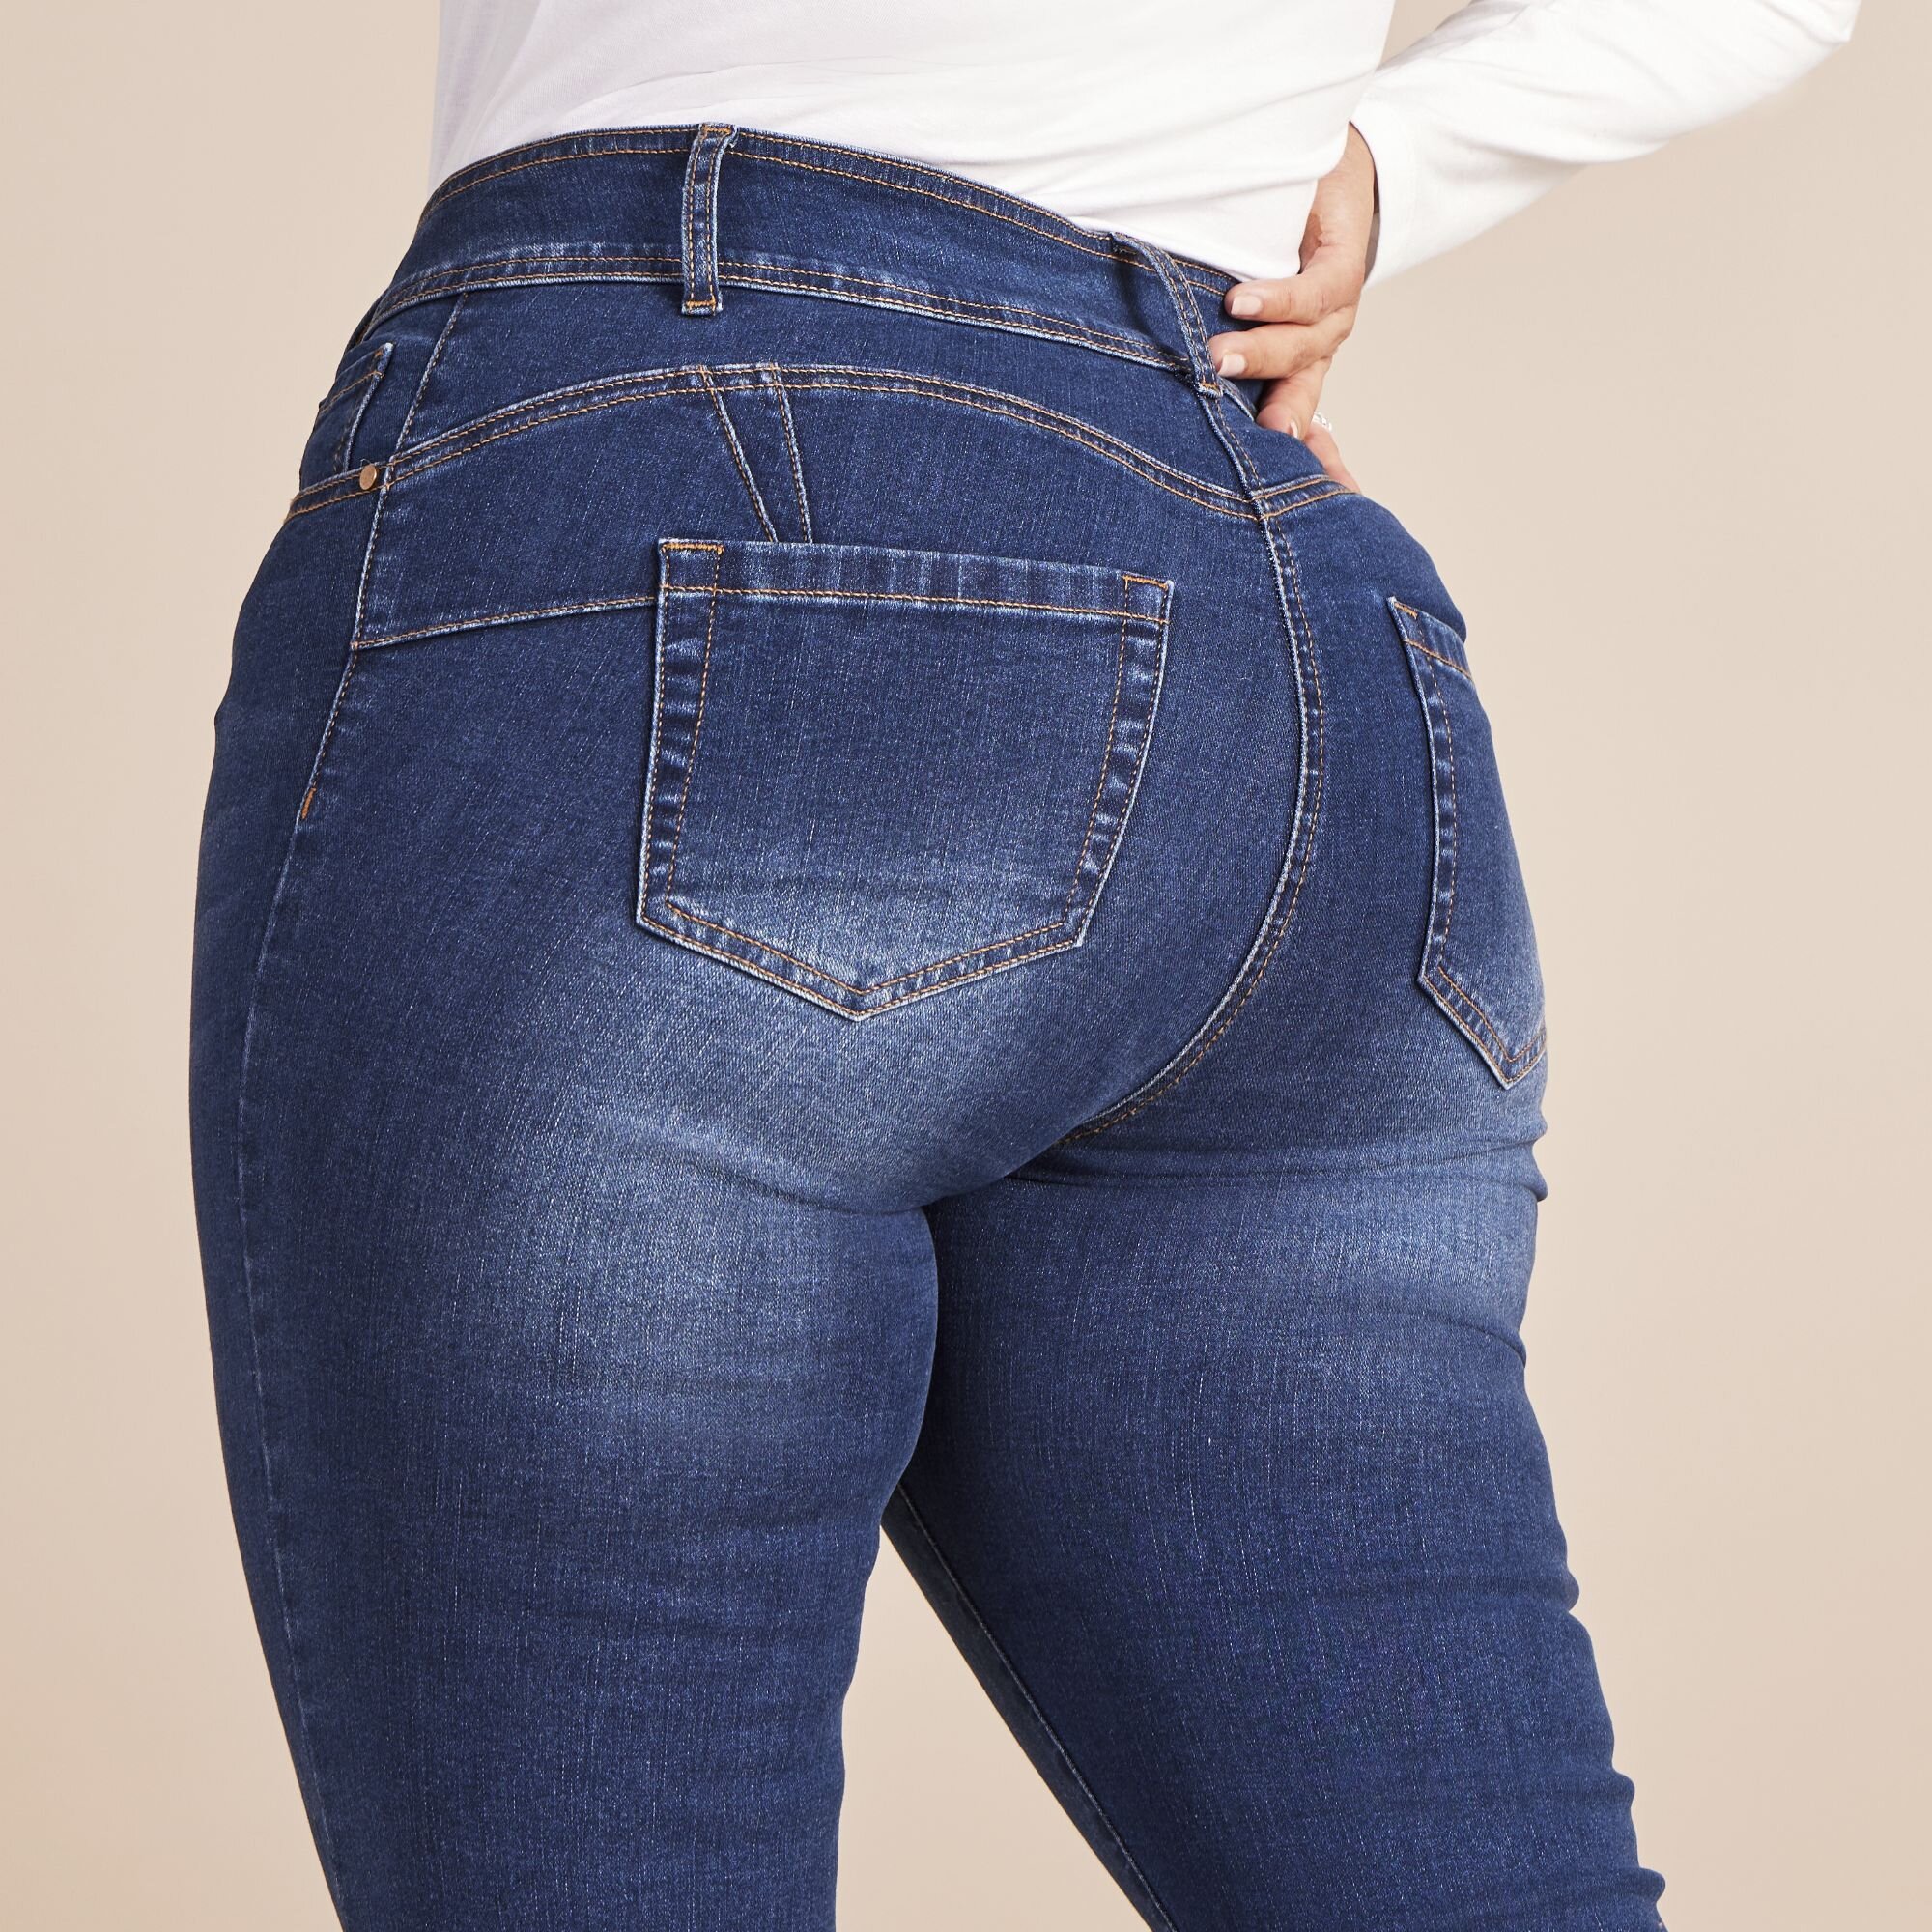 Jeansguide online | Cellbes